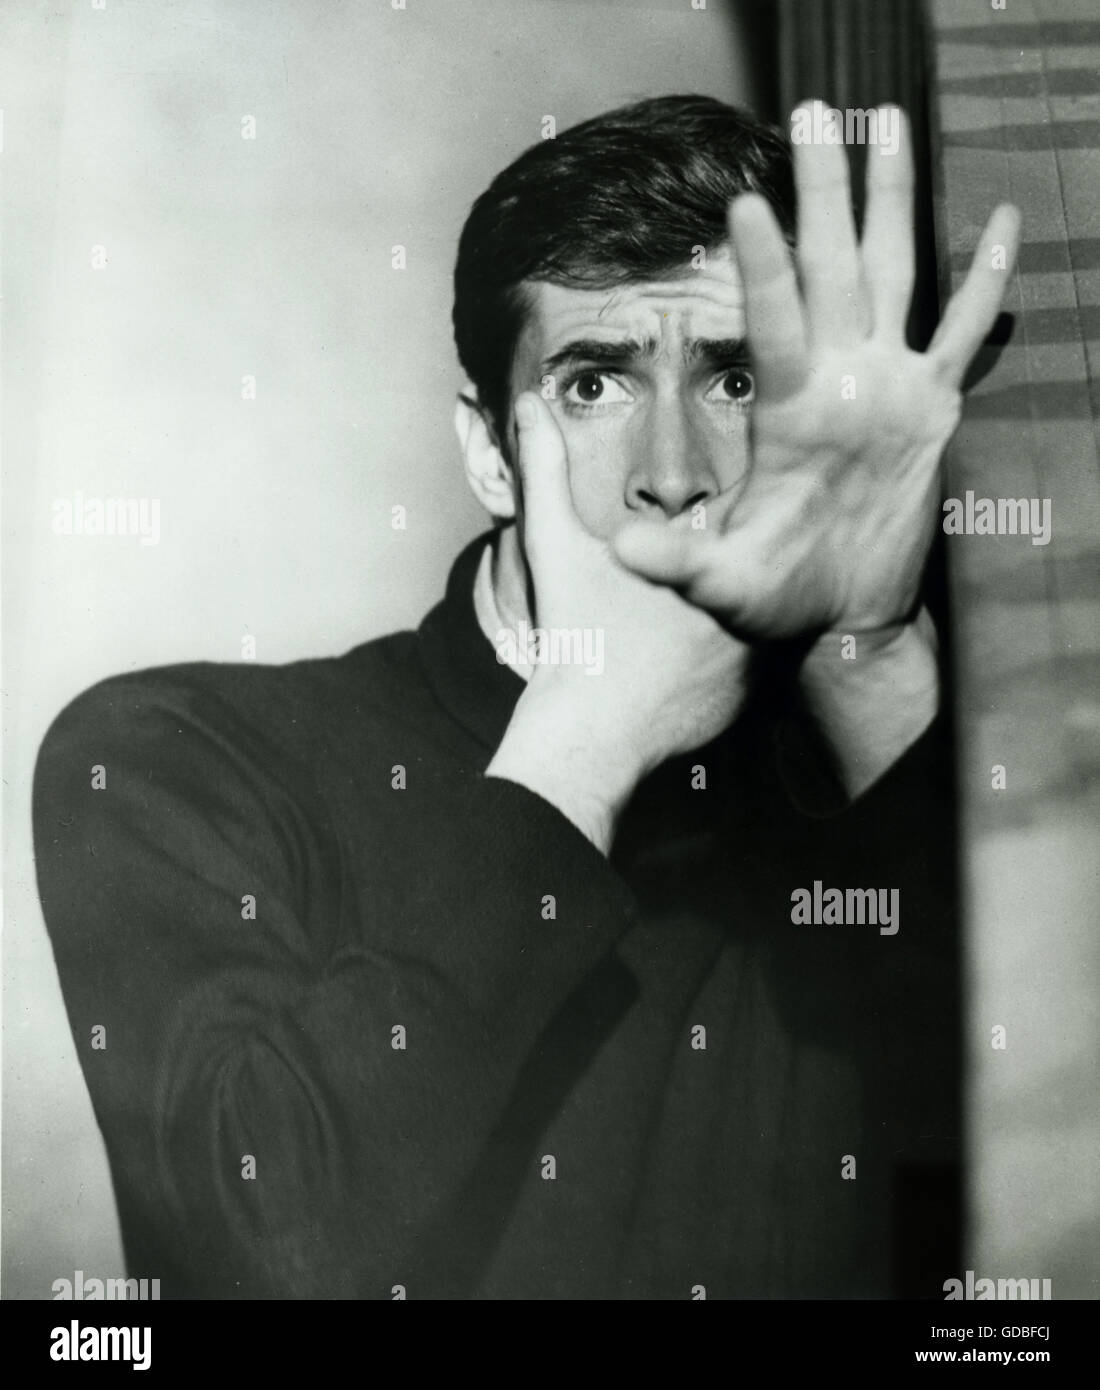 FILM Psycho (1960, Alfred Hitchcock) Anthony Perkins (Norman Bates) Stock Photo